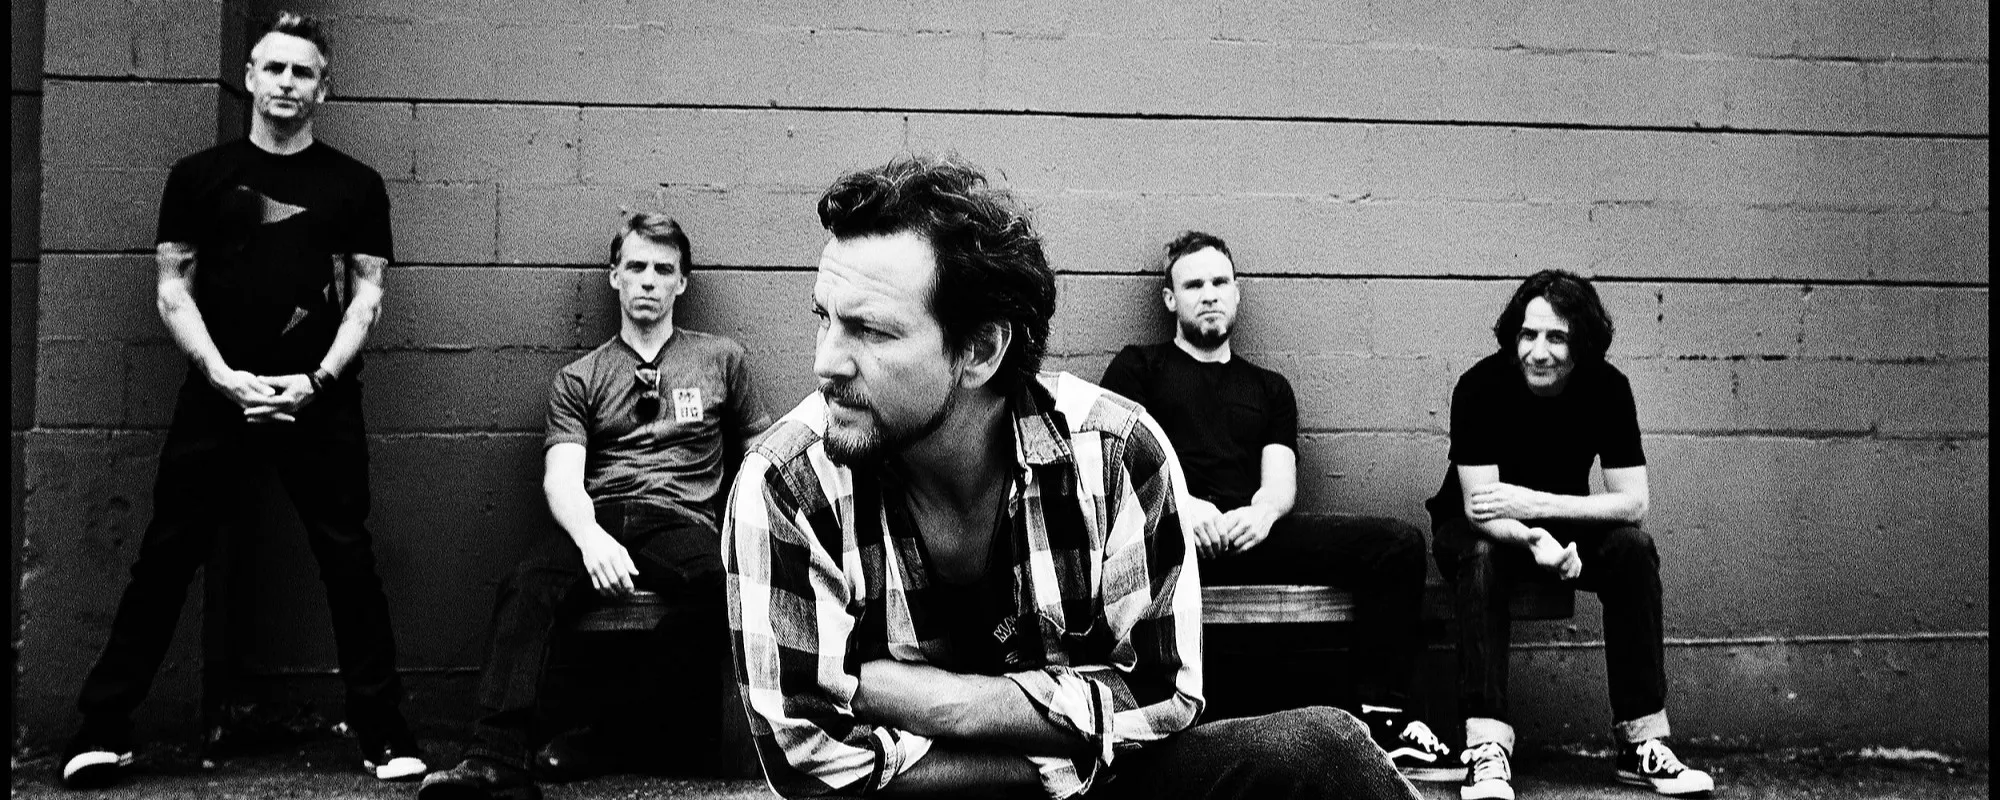 Next Pearl Jam album set to be heavier than you'd expect, says